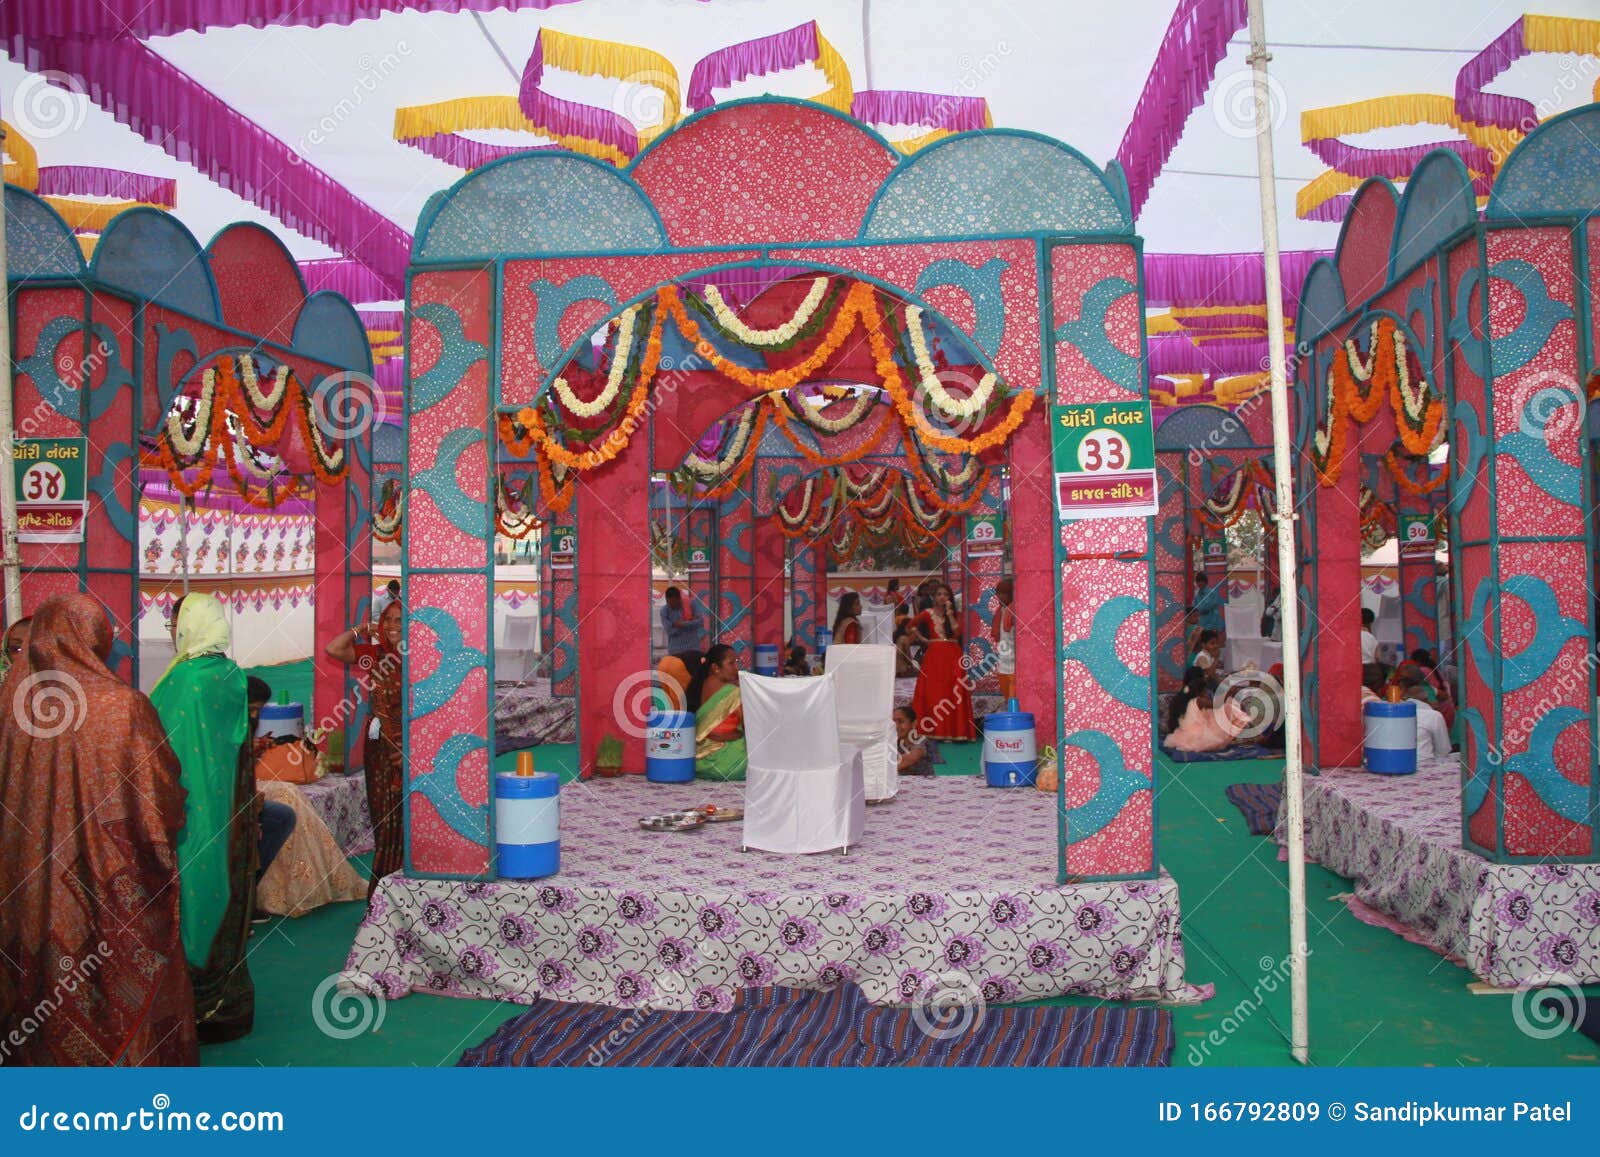 Indian Marriage Decoration and Area. Editorial Stock Image - Image ...